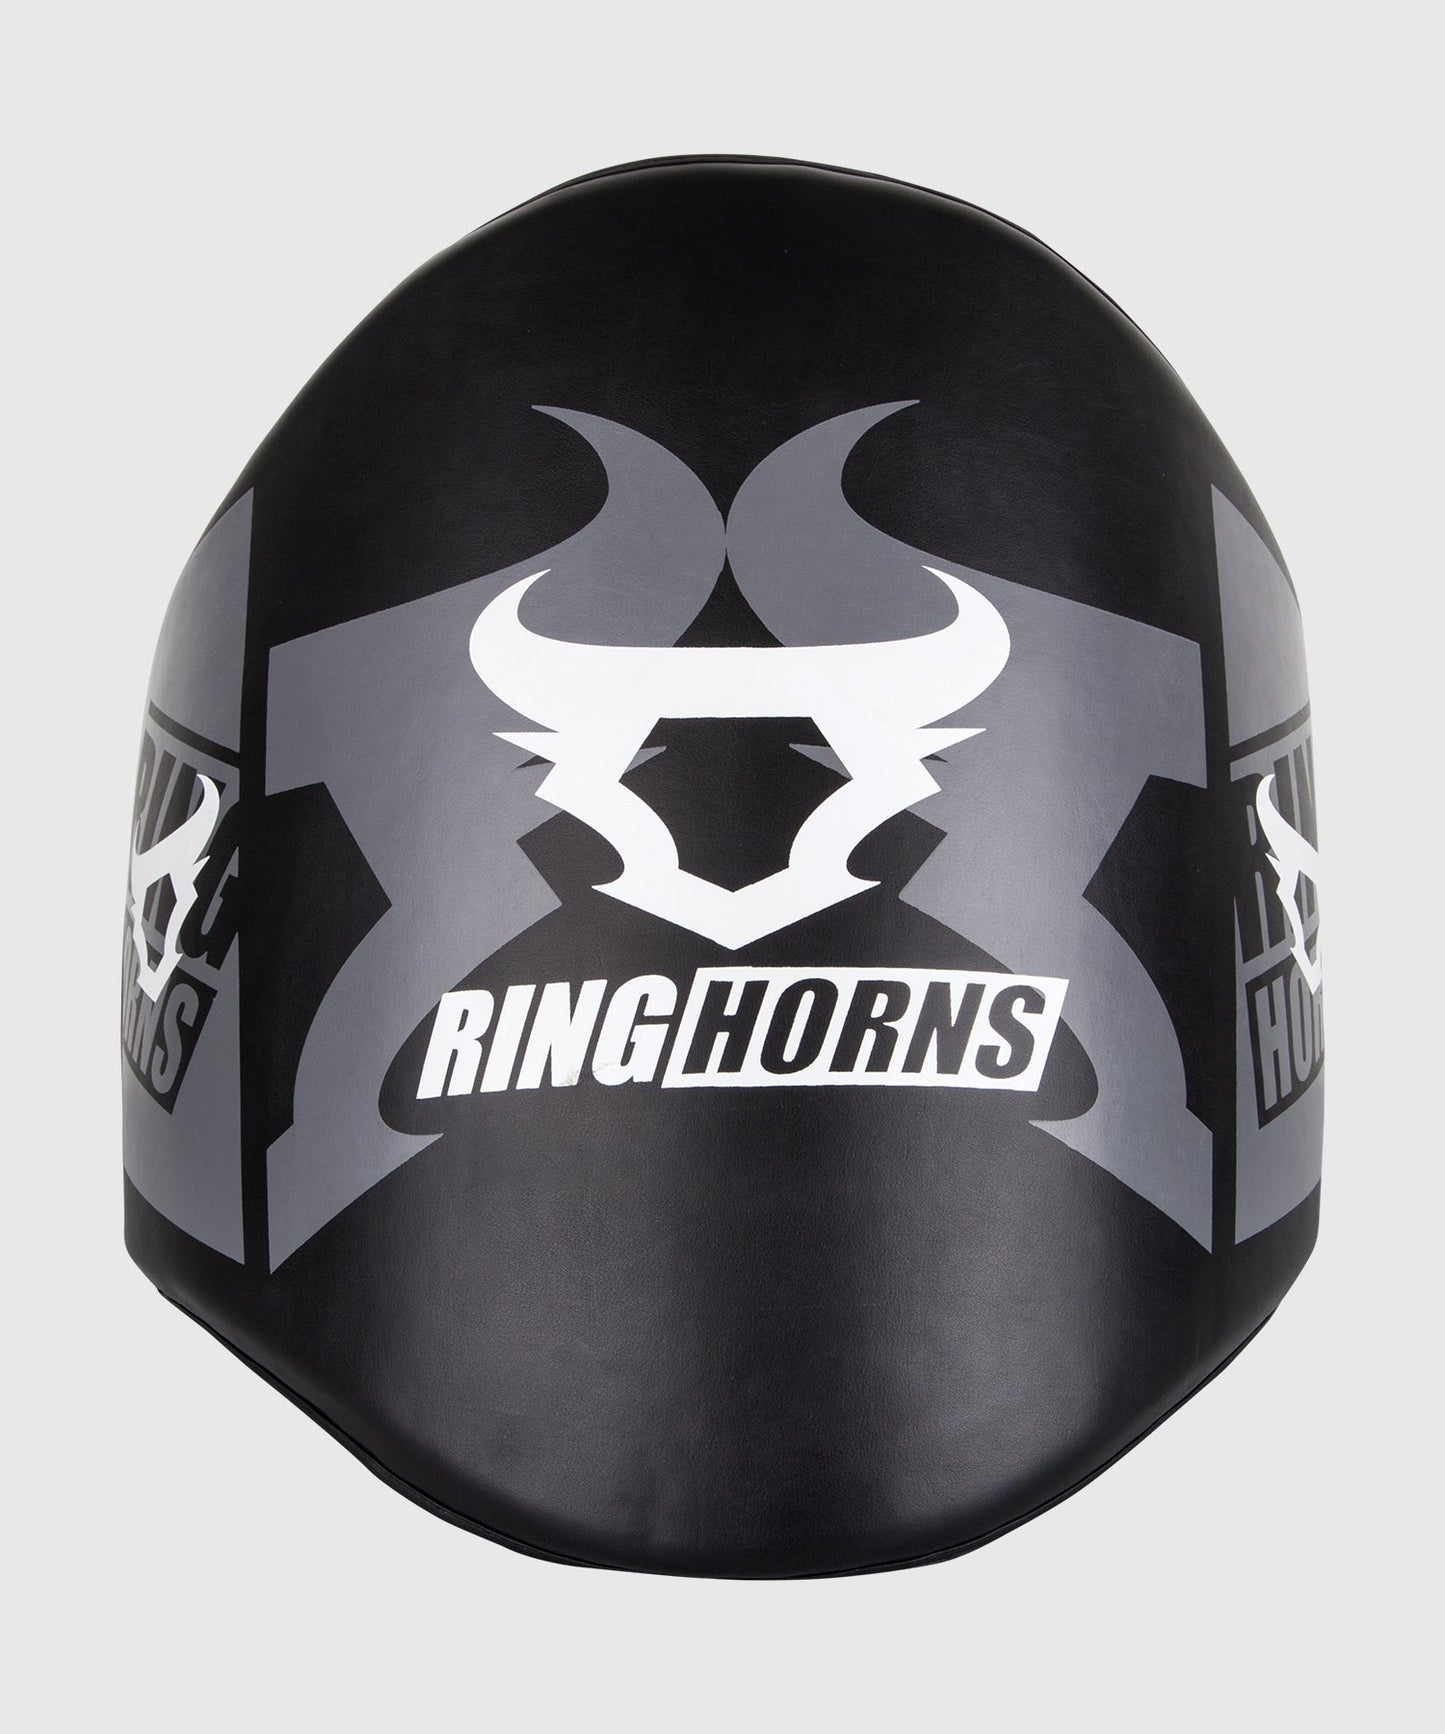 Ringhorns Charger Belly Protector - Black